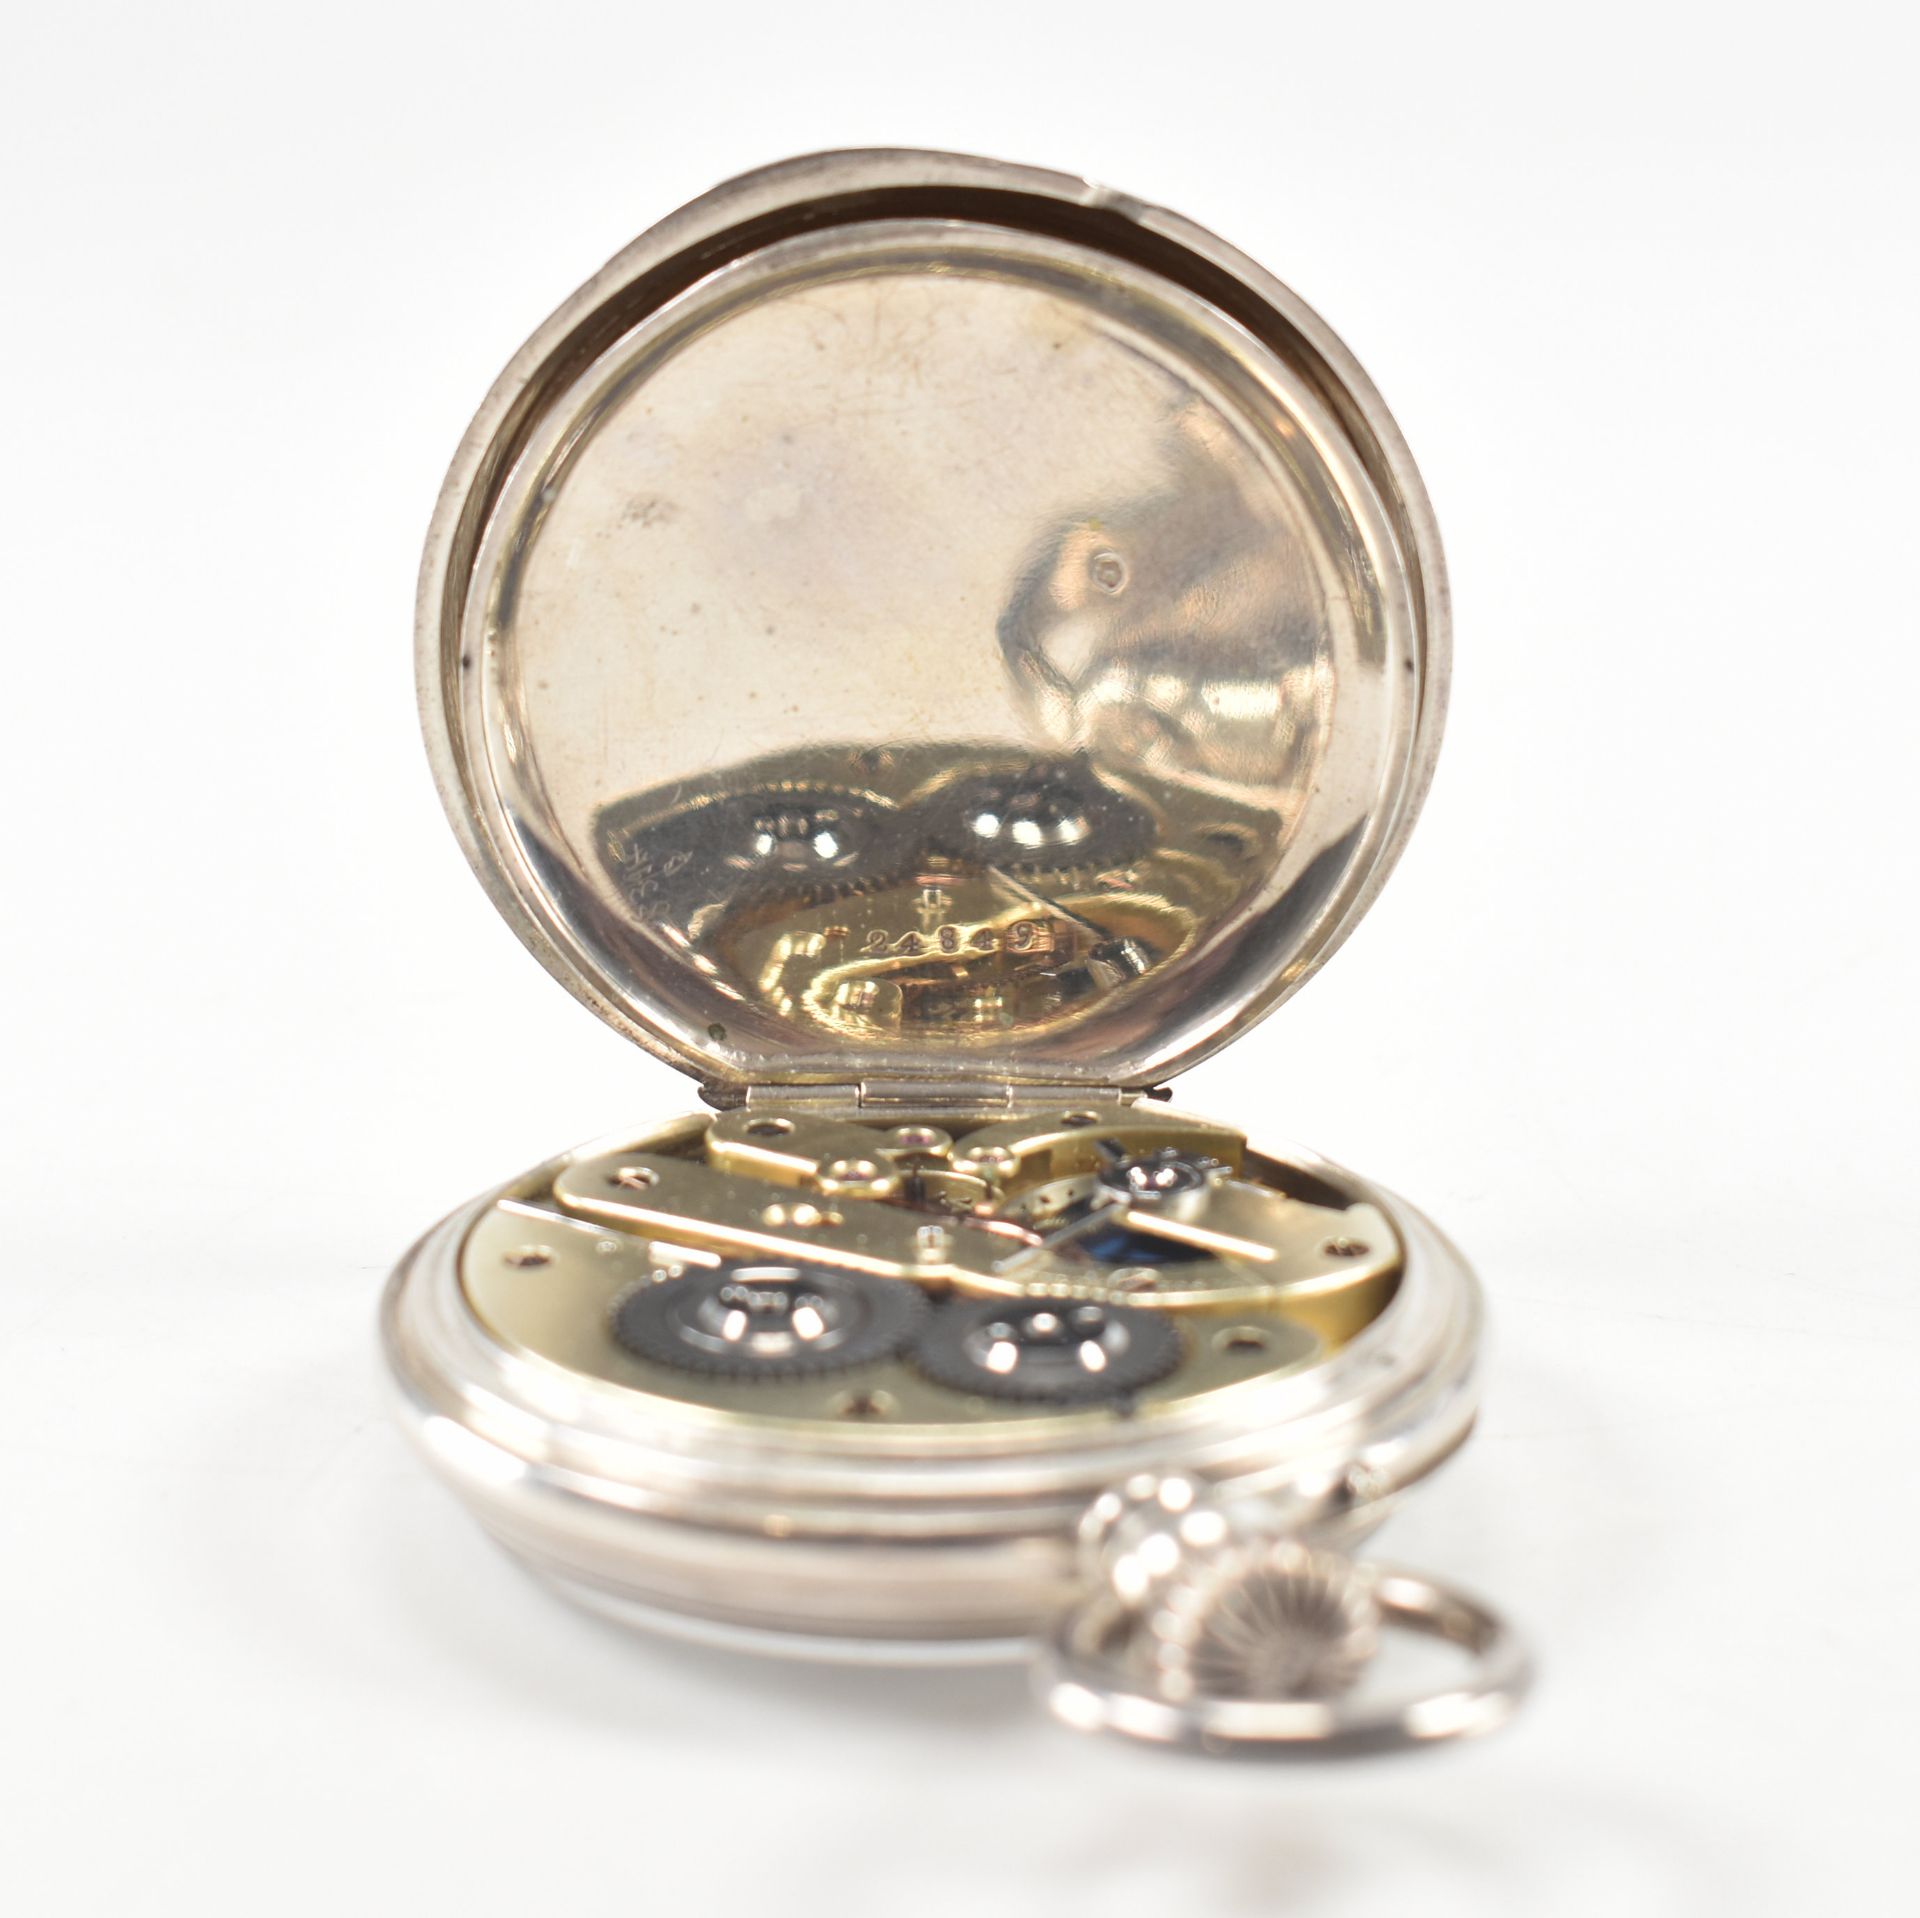 ANTIQUE FRENCH SILVER OPEN FACE POCKET WATCH - Image 5 of 7